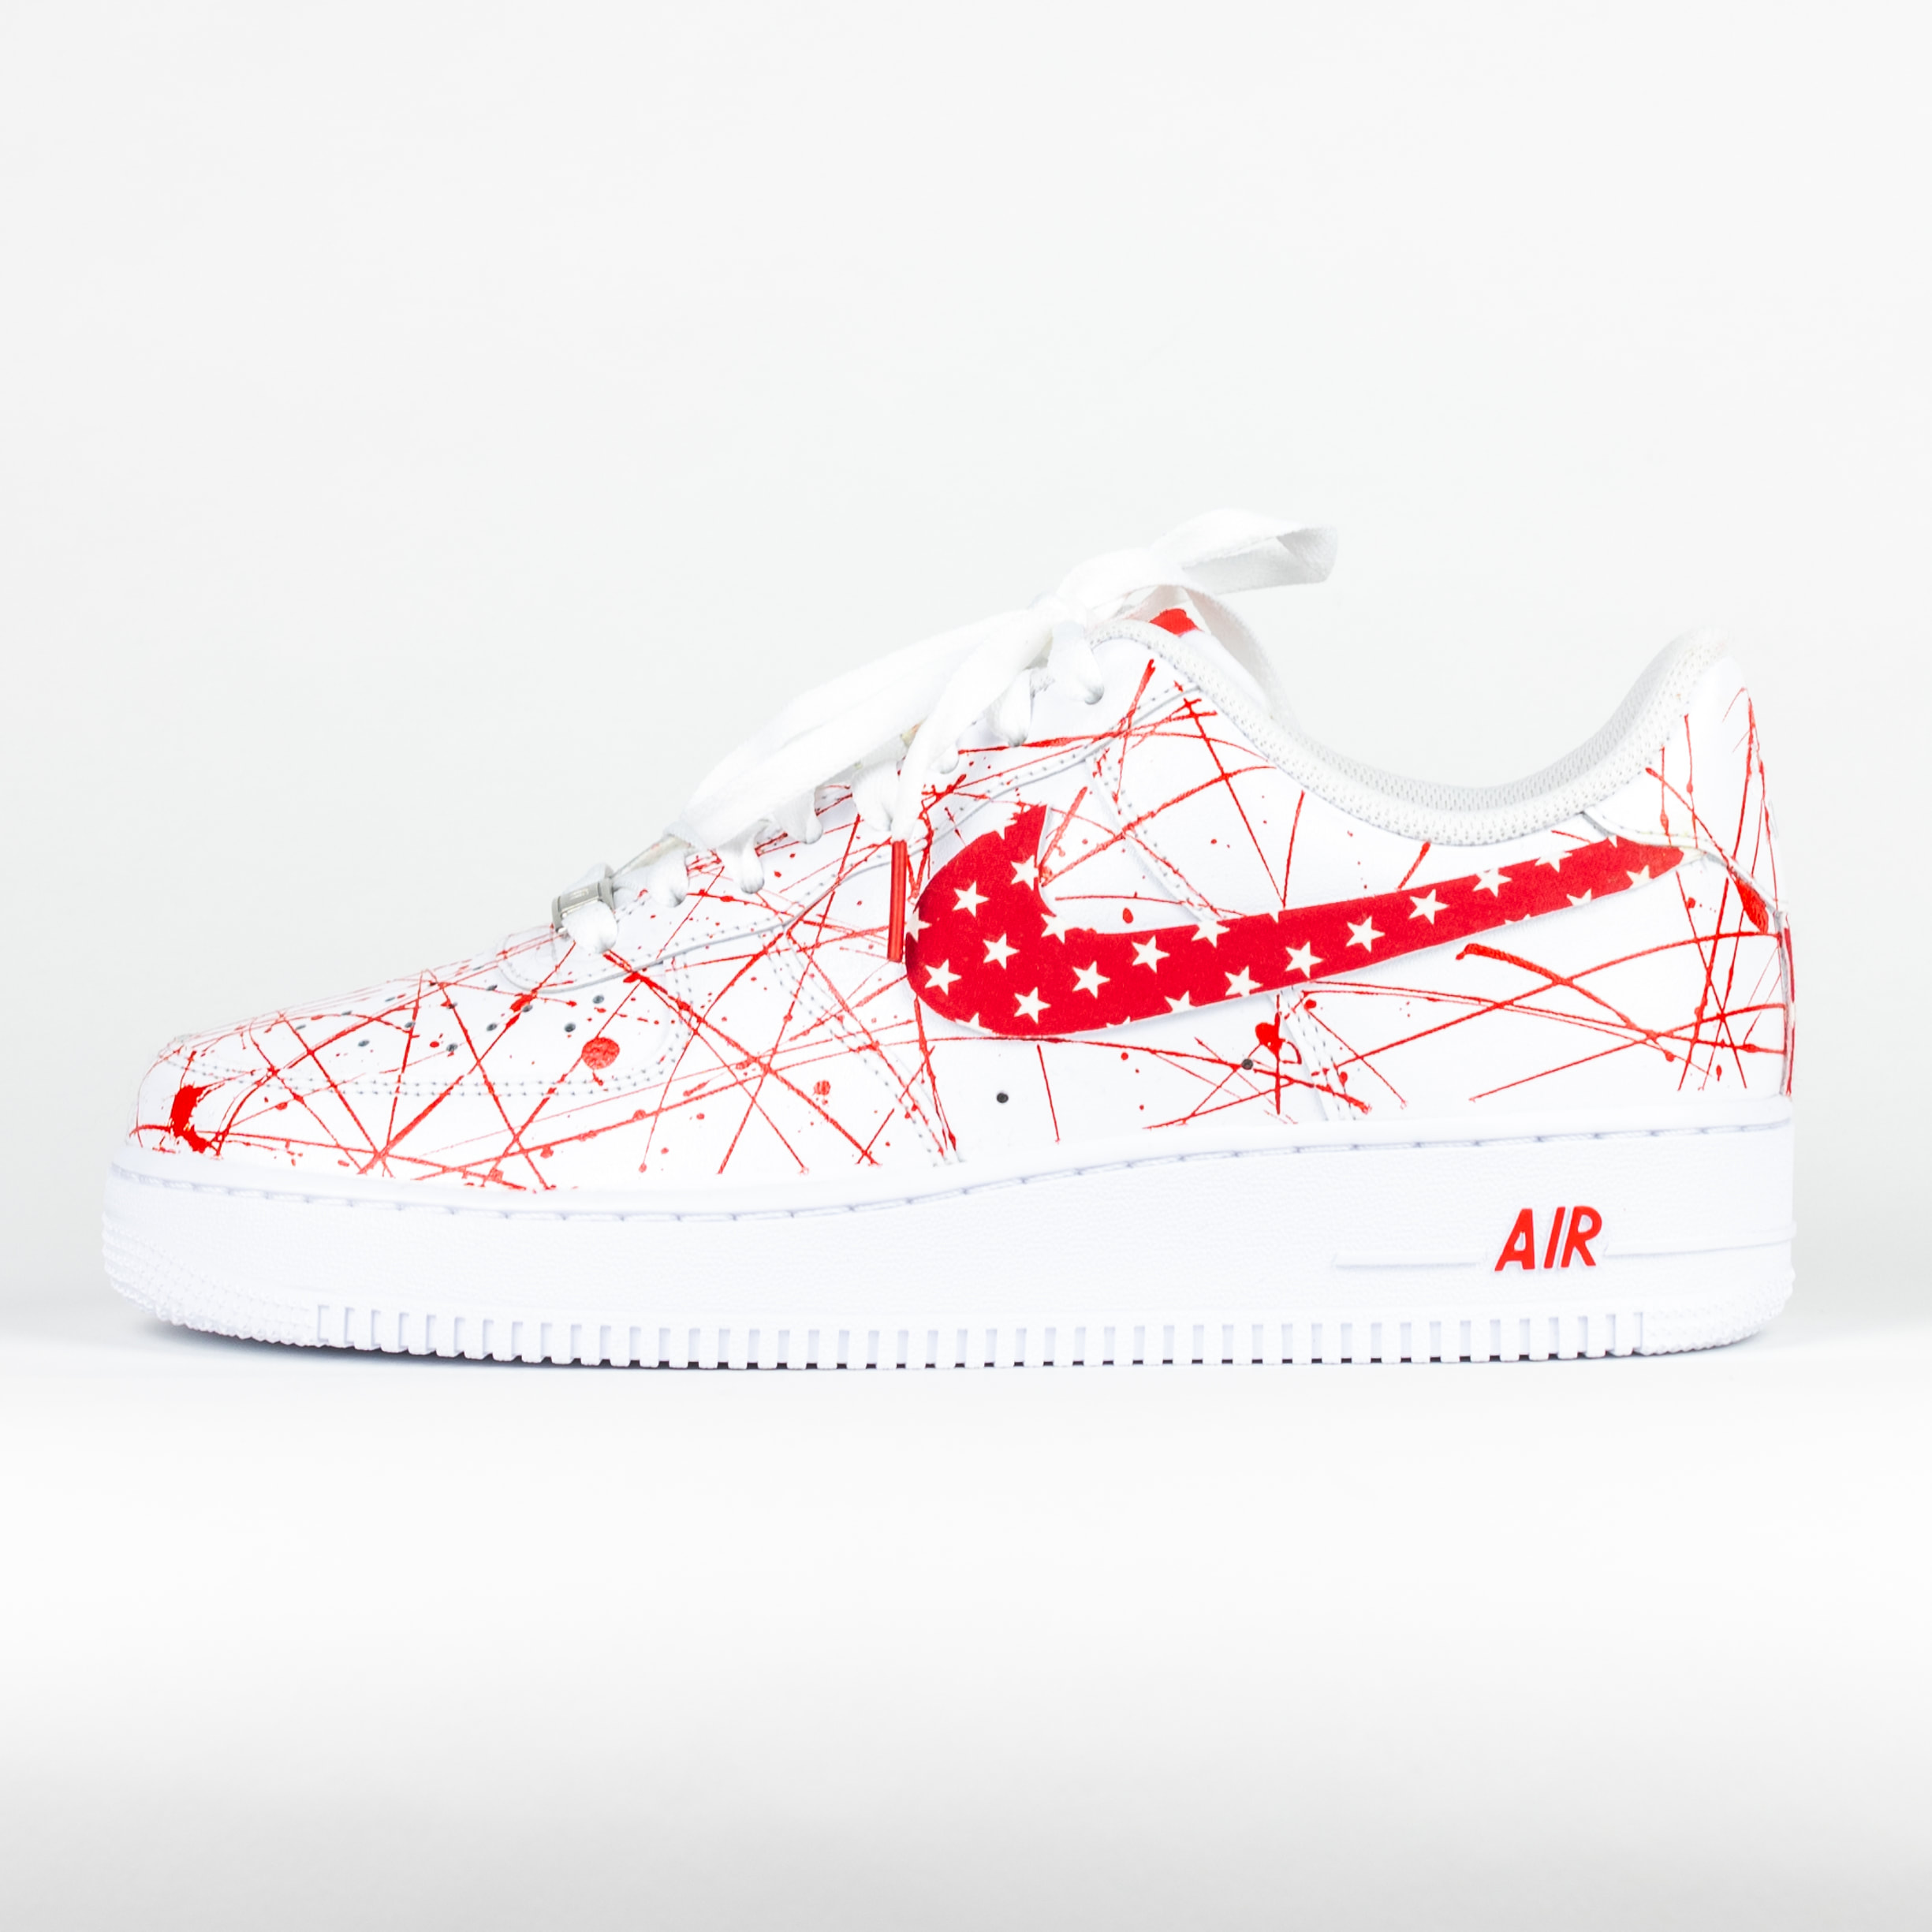 nike air force 1 white with stars